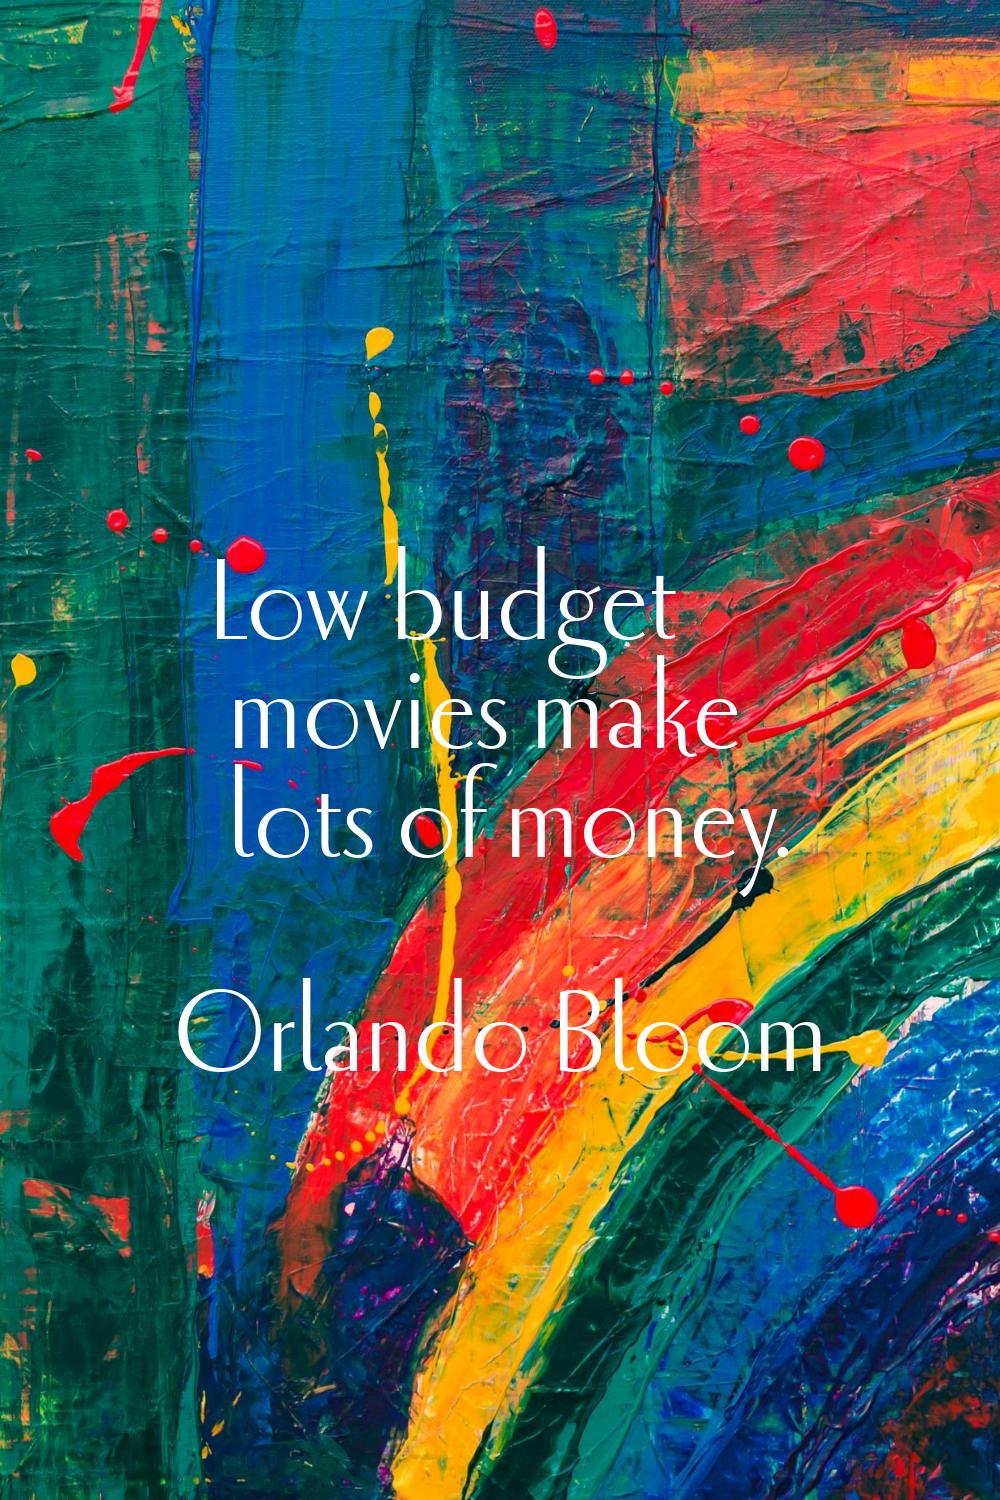 Low budget movies make lots of money.